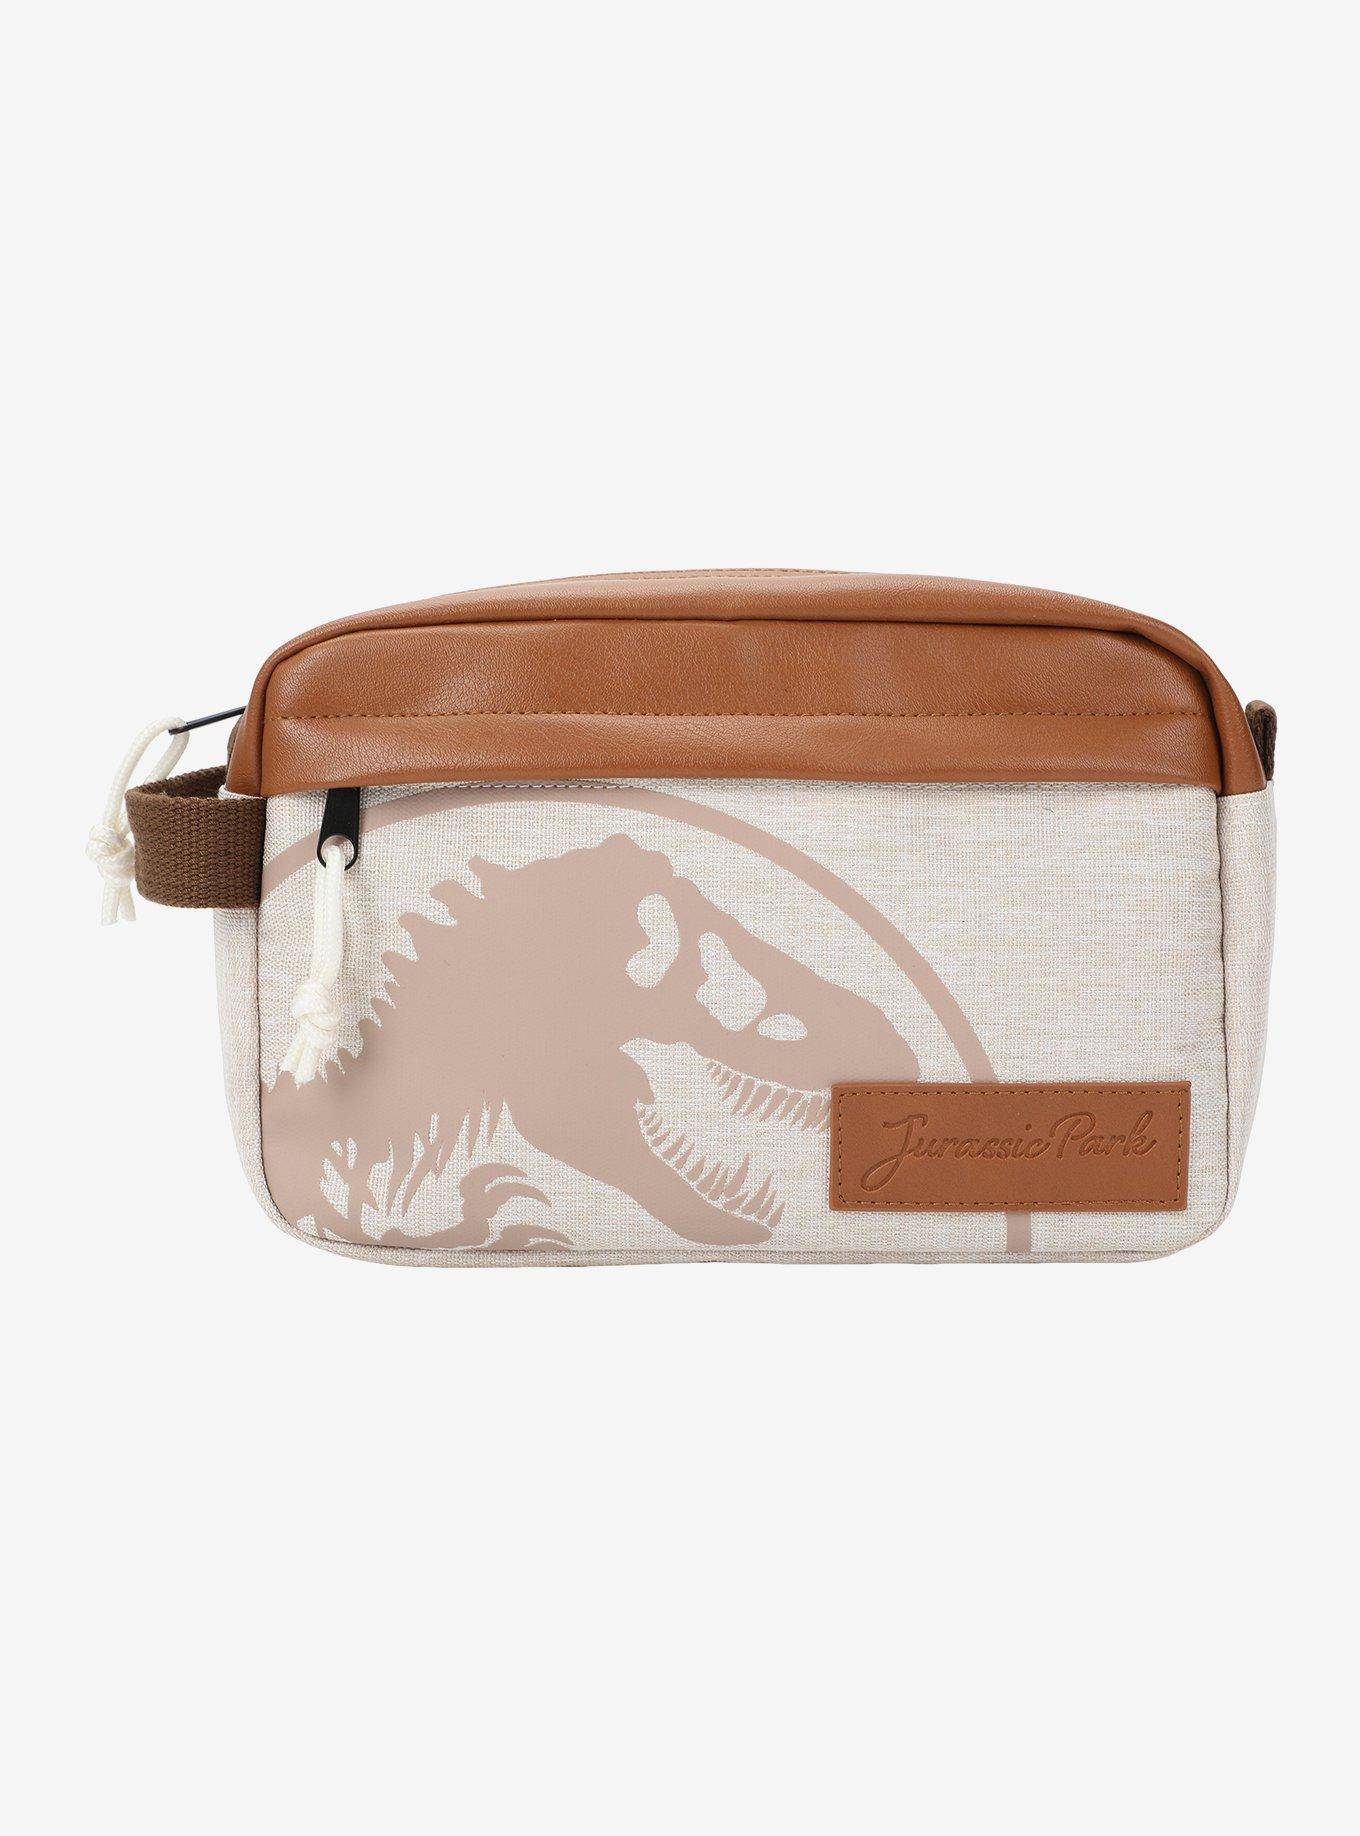 Claire's Status Icons Brown Faux Leather Fanny Pack